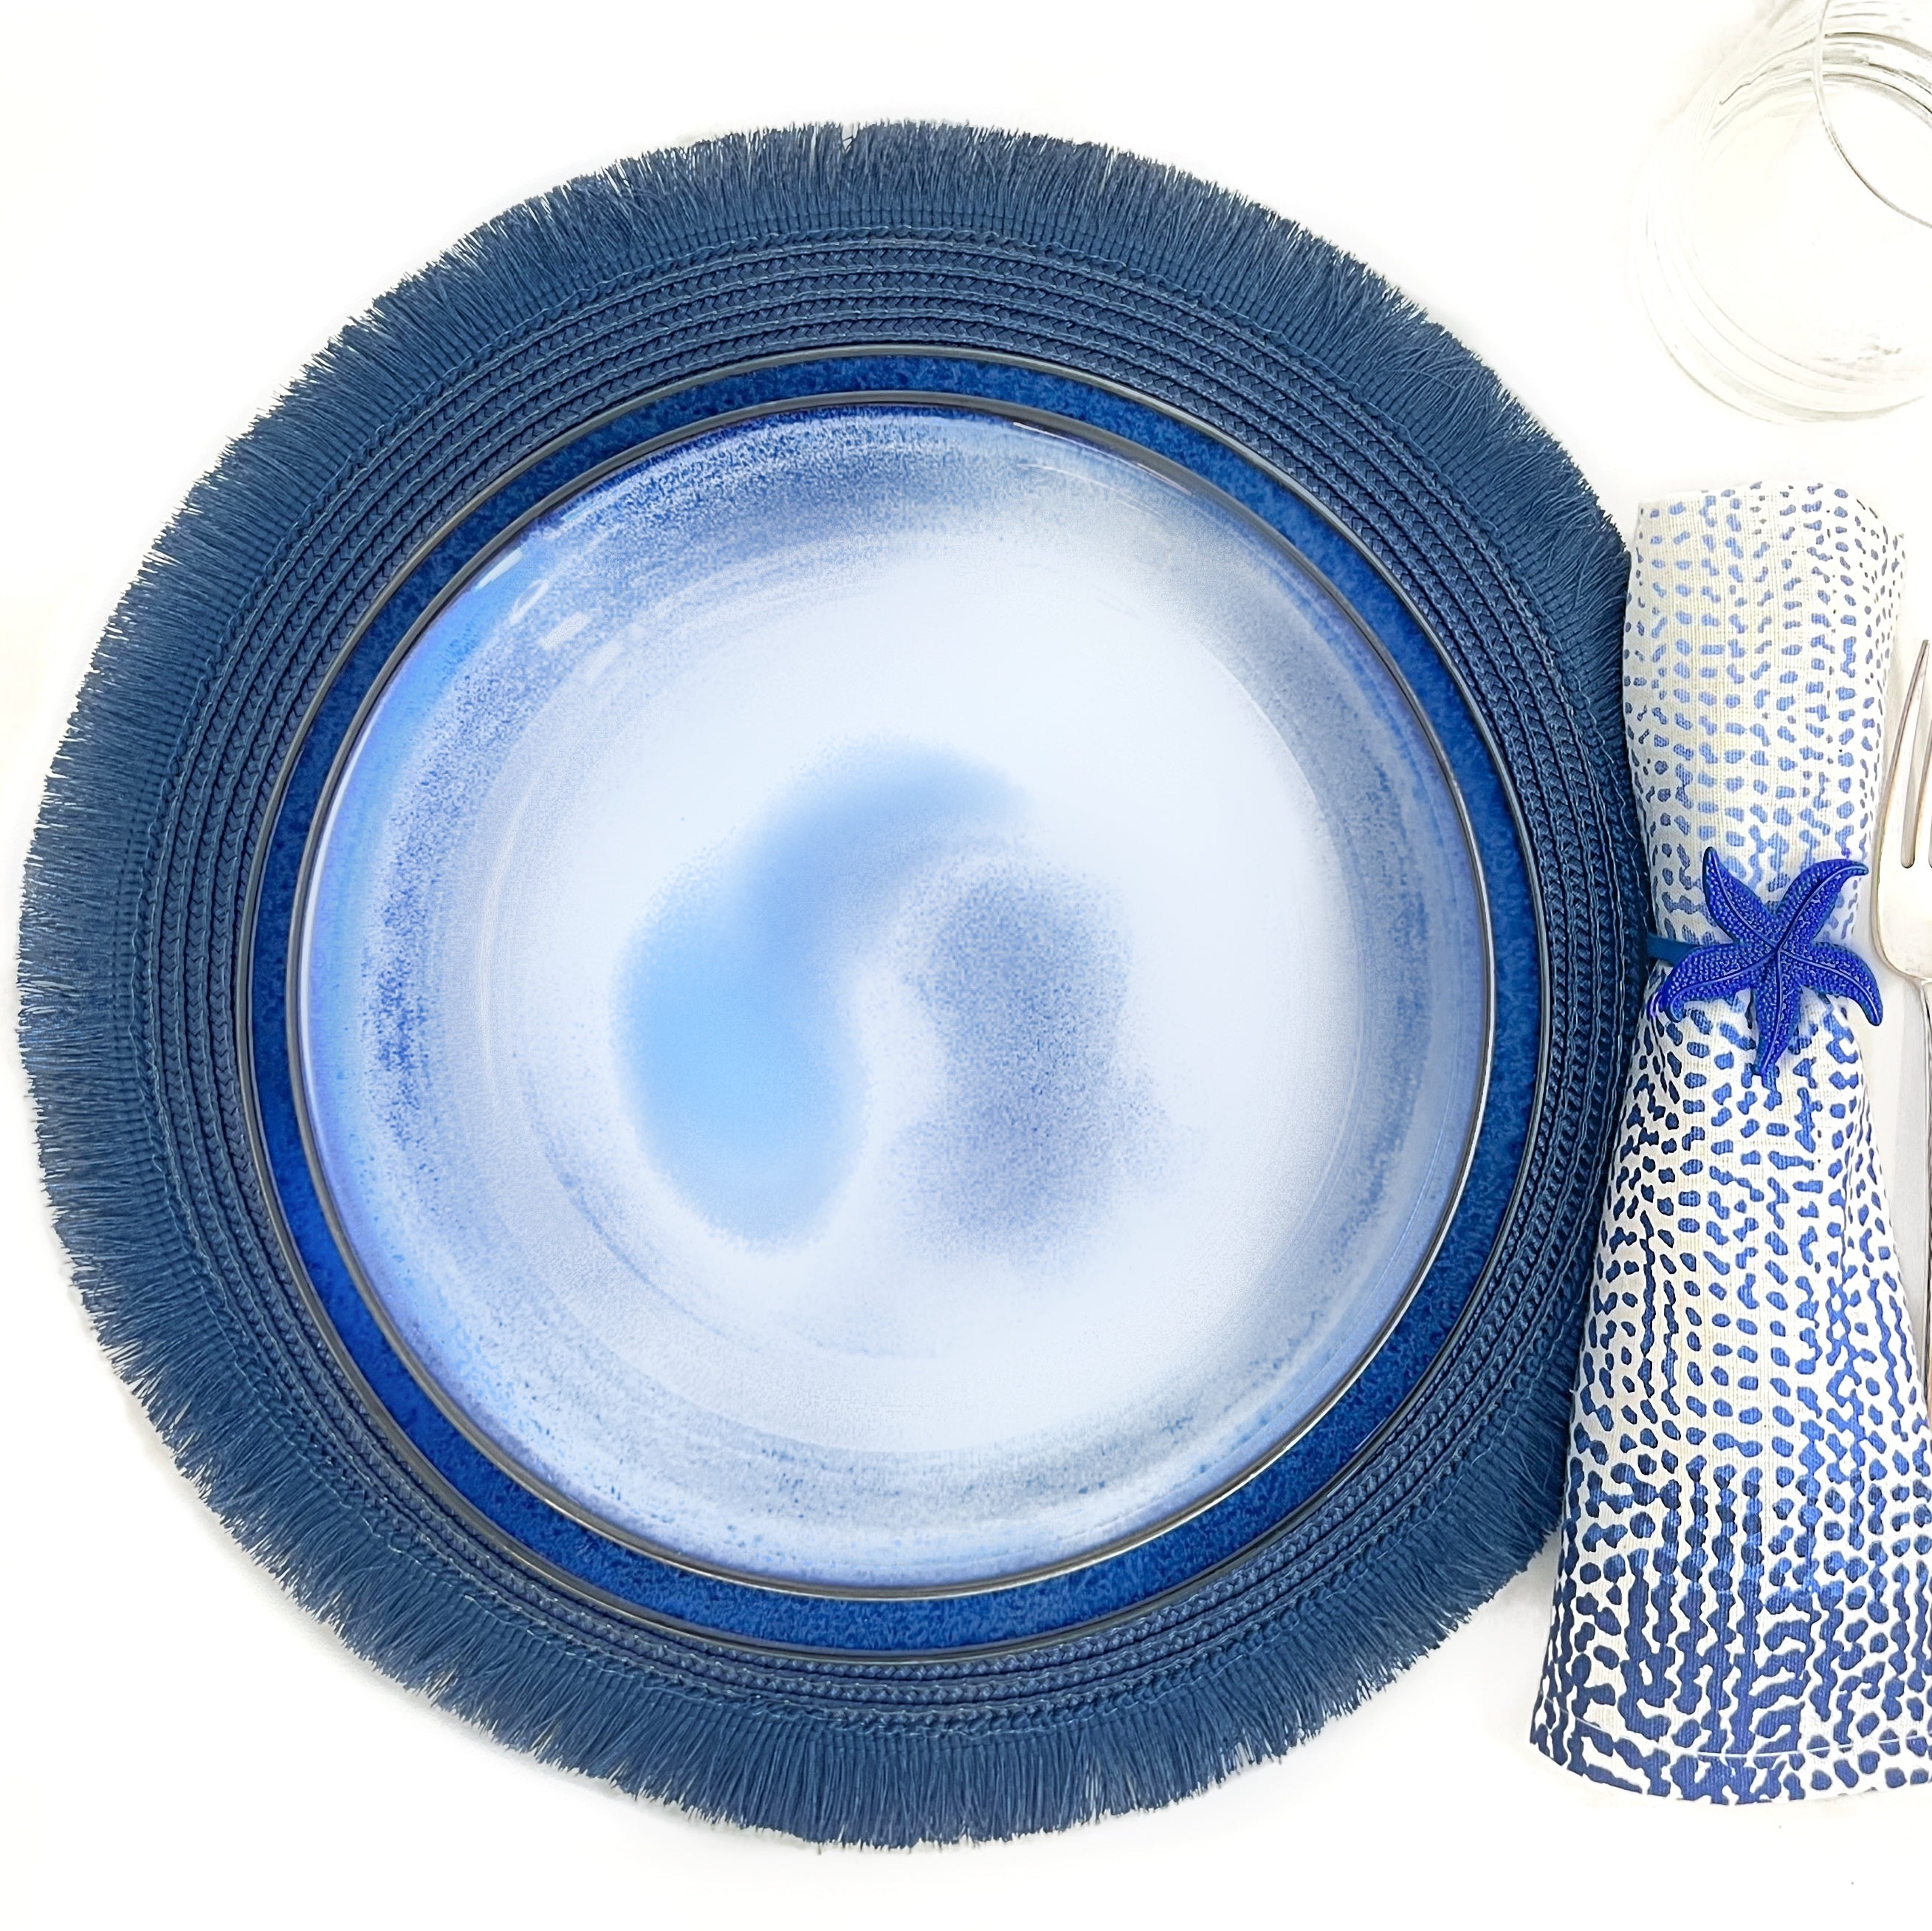 Tablescapes and  table accessories, beaded napkin rings, linen napkins and placemats.